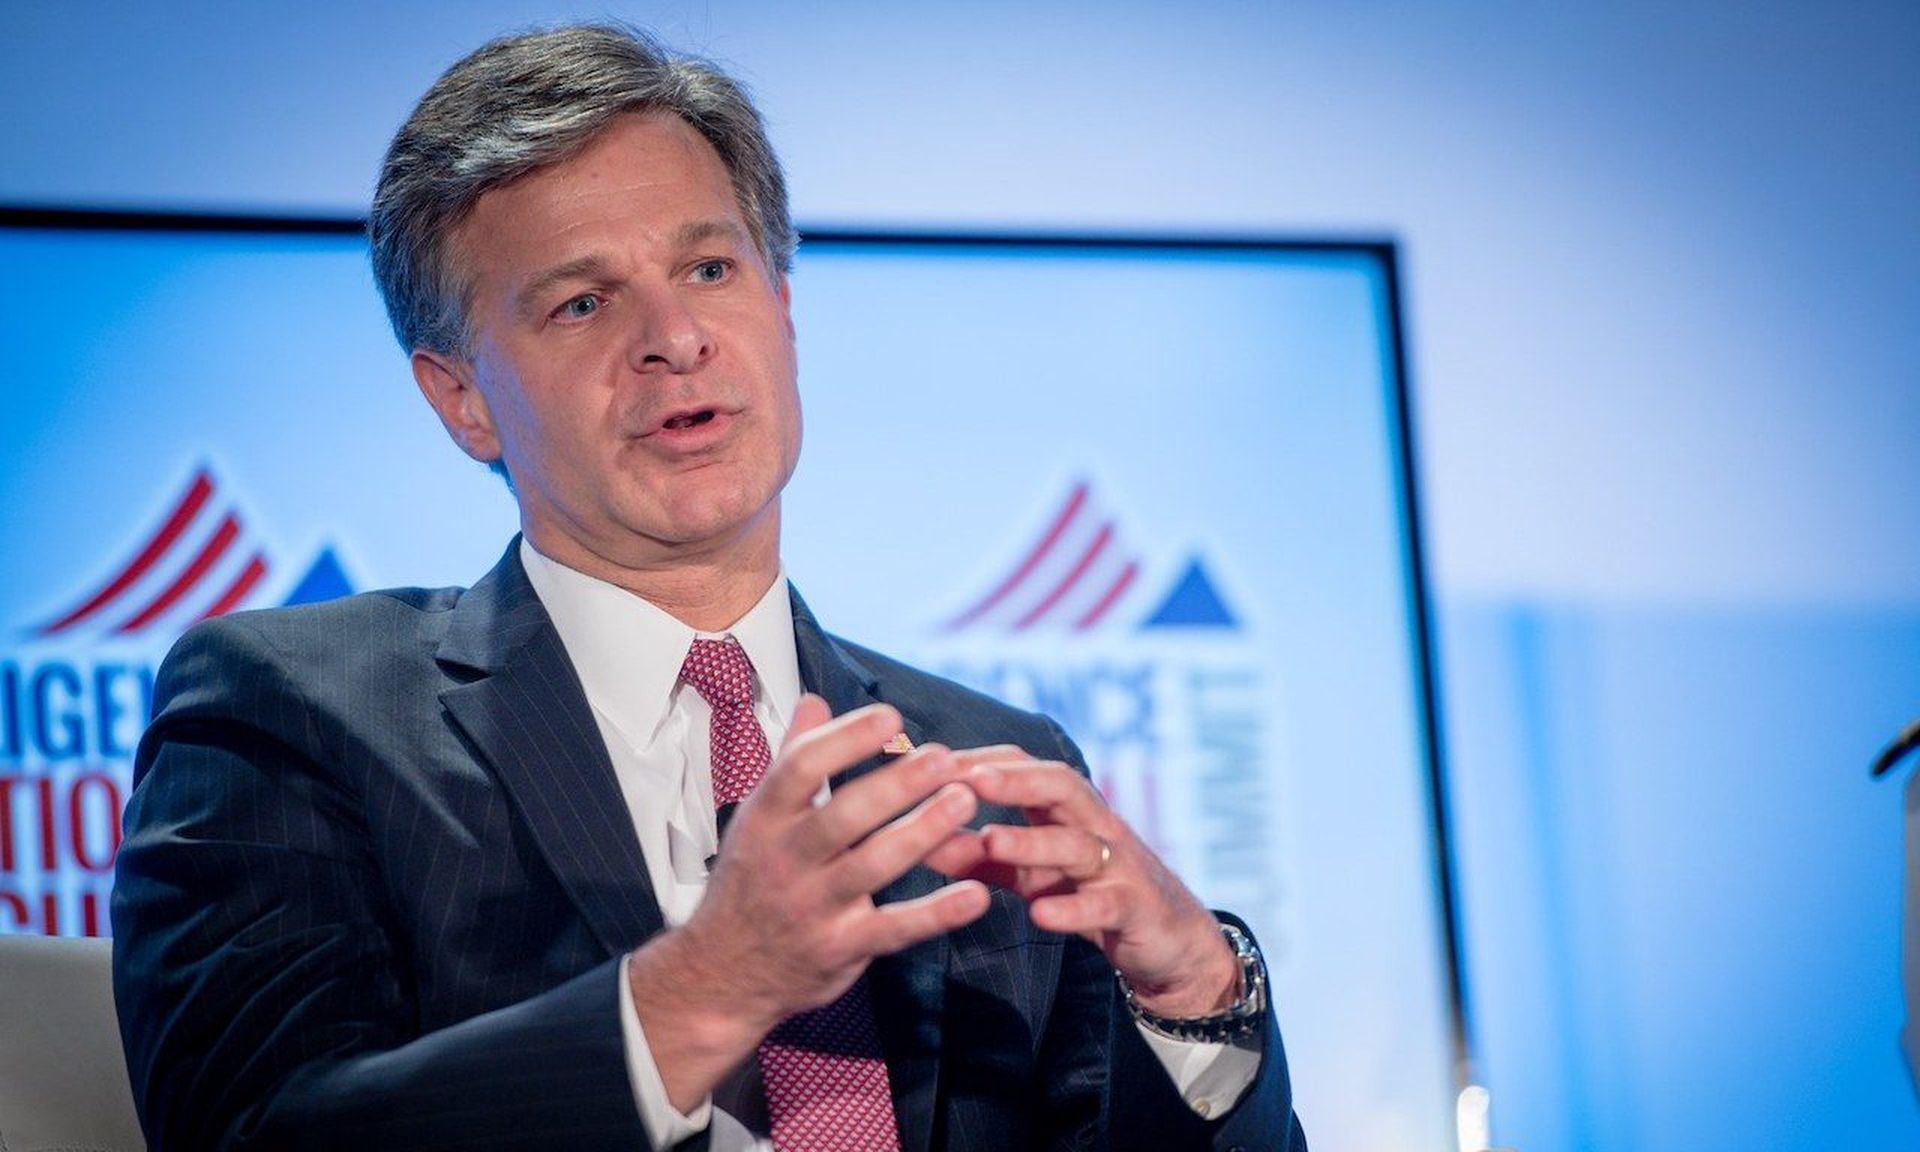 FBI Director Christopher Wray speaks to a group in Washington, D.C. Today’s columnist, Perry Carpenter of KnowBe4, writes that with the FBI reporting an increase of 300,000 in internet crime complaints in 2020, SOAR tools can strike a nice balance between automation and human analysis.